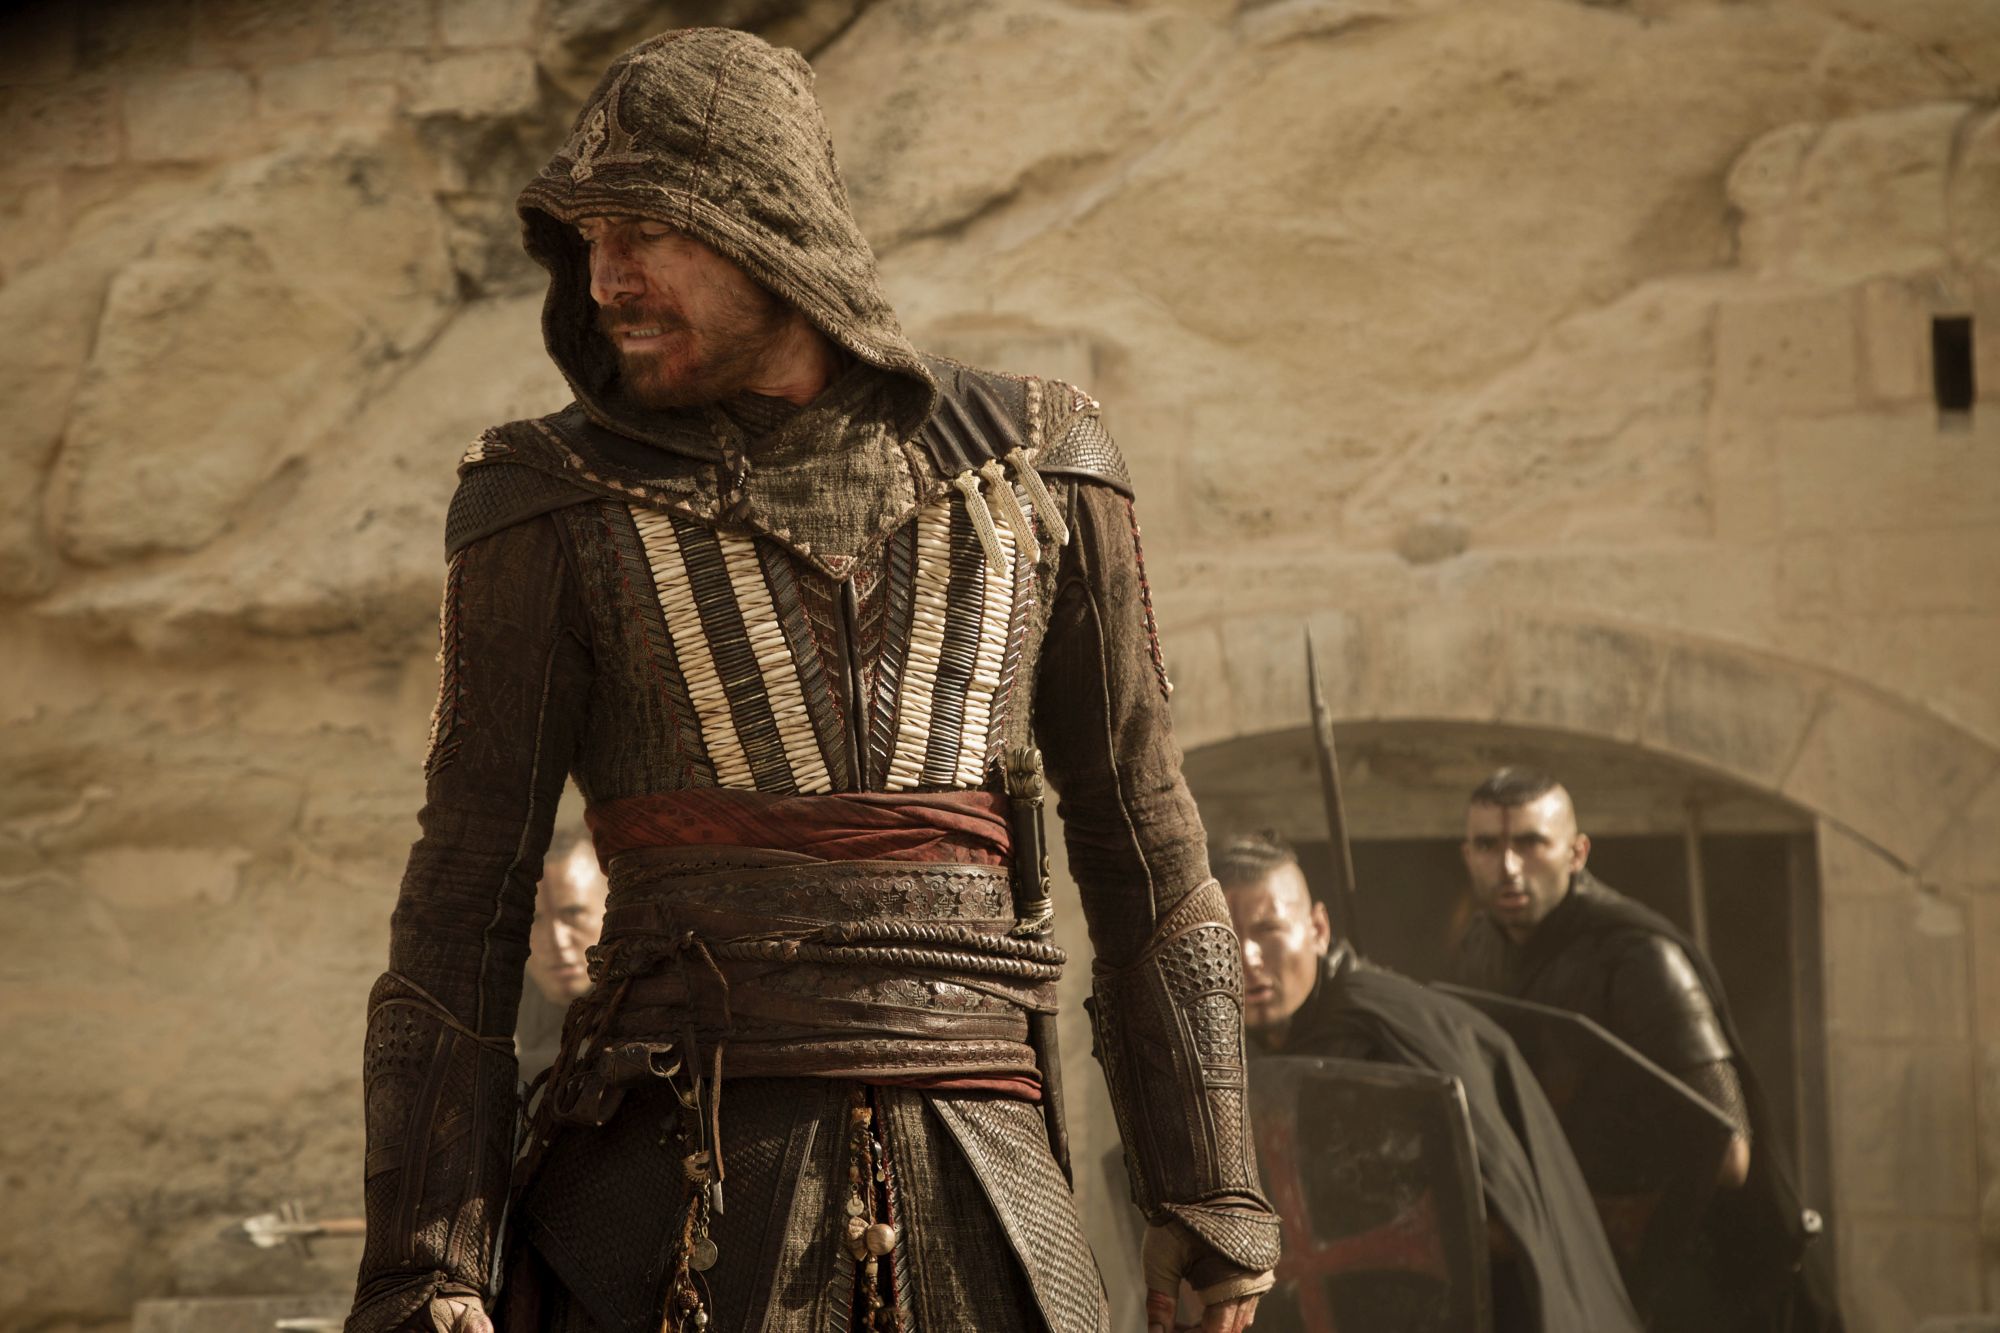 It's Game On For Michael Fassbender In New Trailer For 'Assassin's Creed'